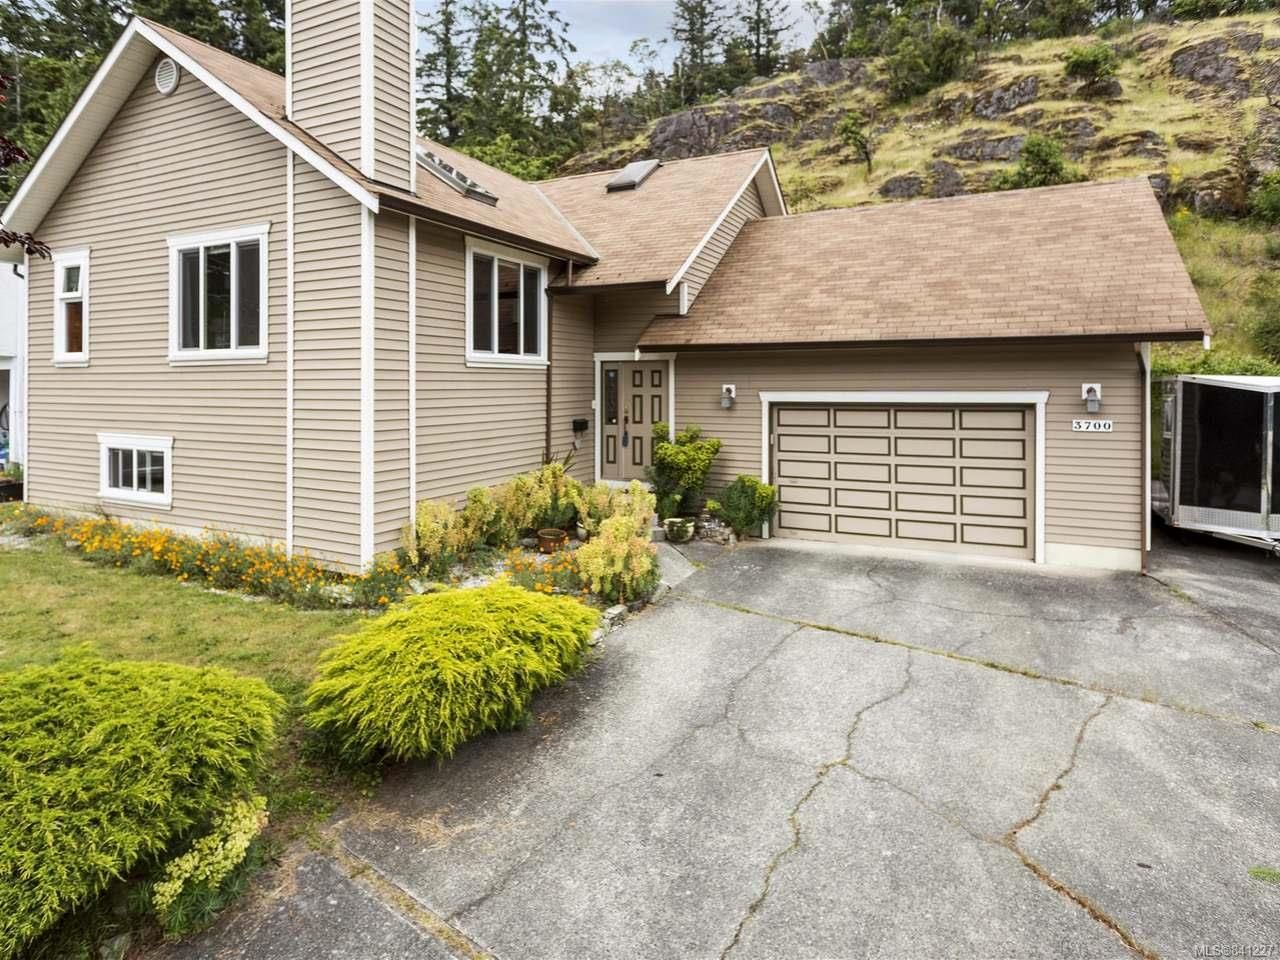 Main Photo: 3700 Howden Dr in NANAIMO: Na Uplands House for sale (Nanaimo)  : MLS®# 841227